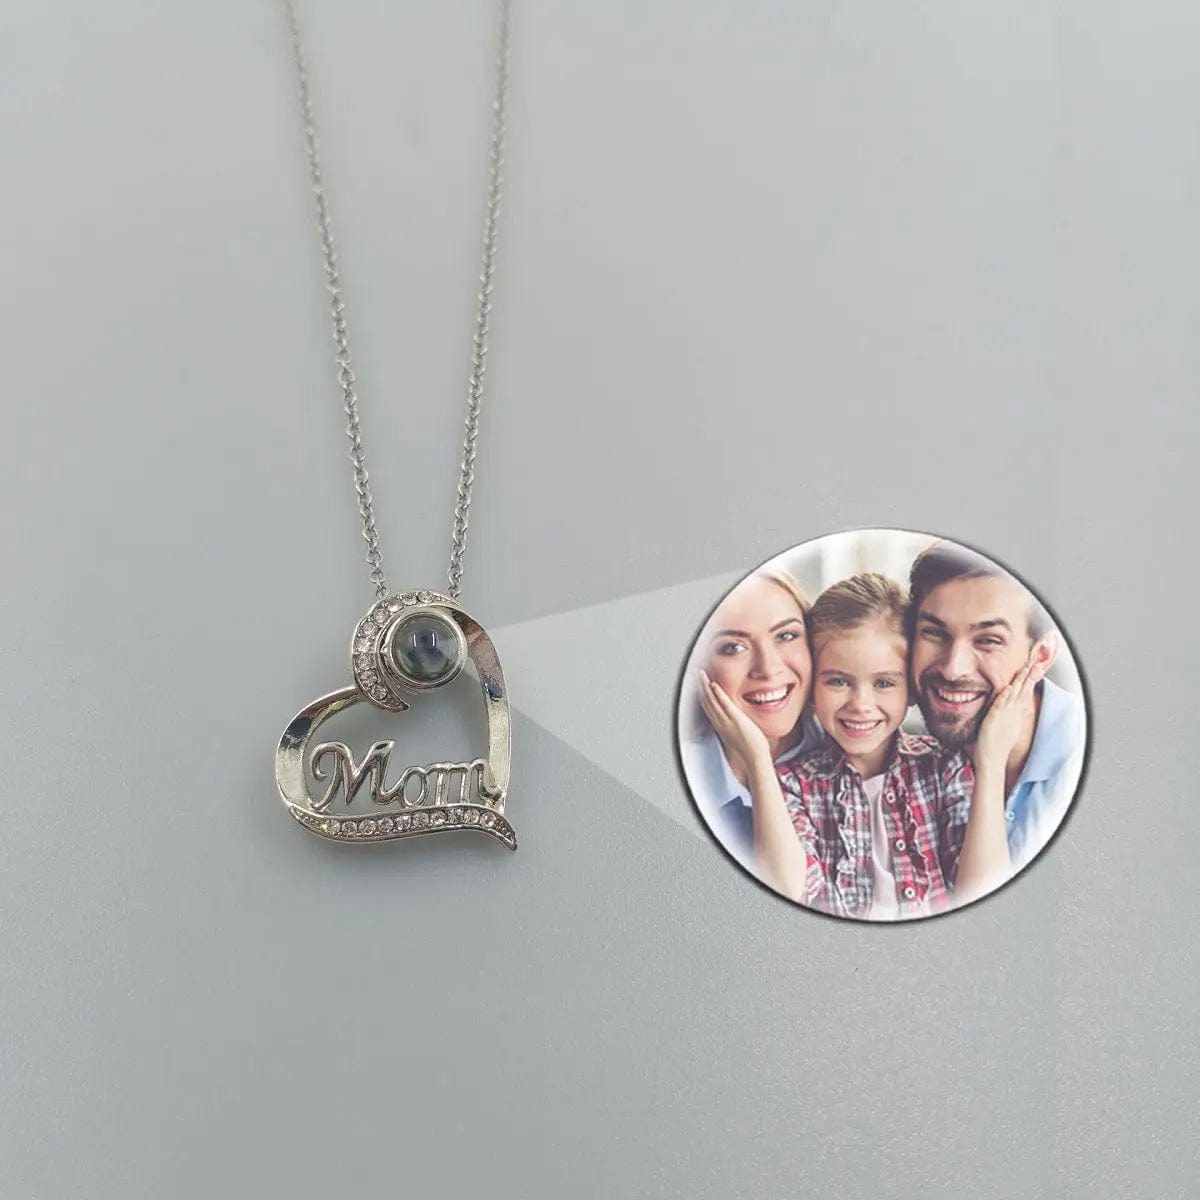 Custom Photo Projection Heart Mom Pendant Necklace - Hidden Forever